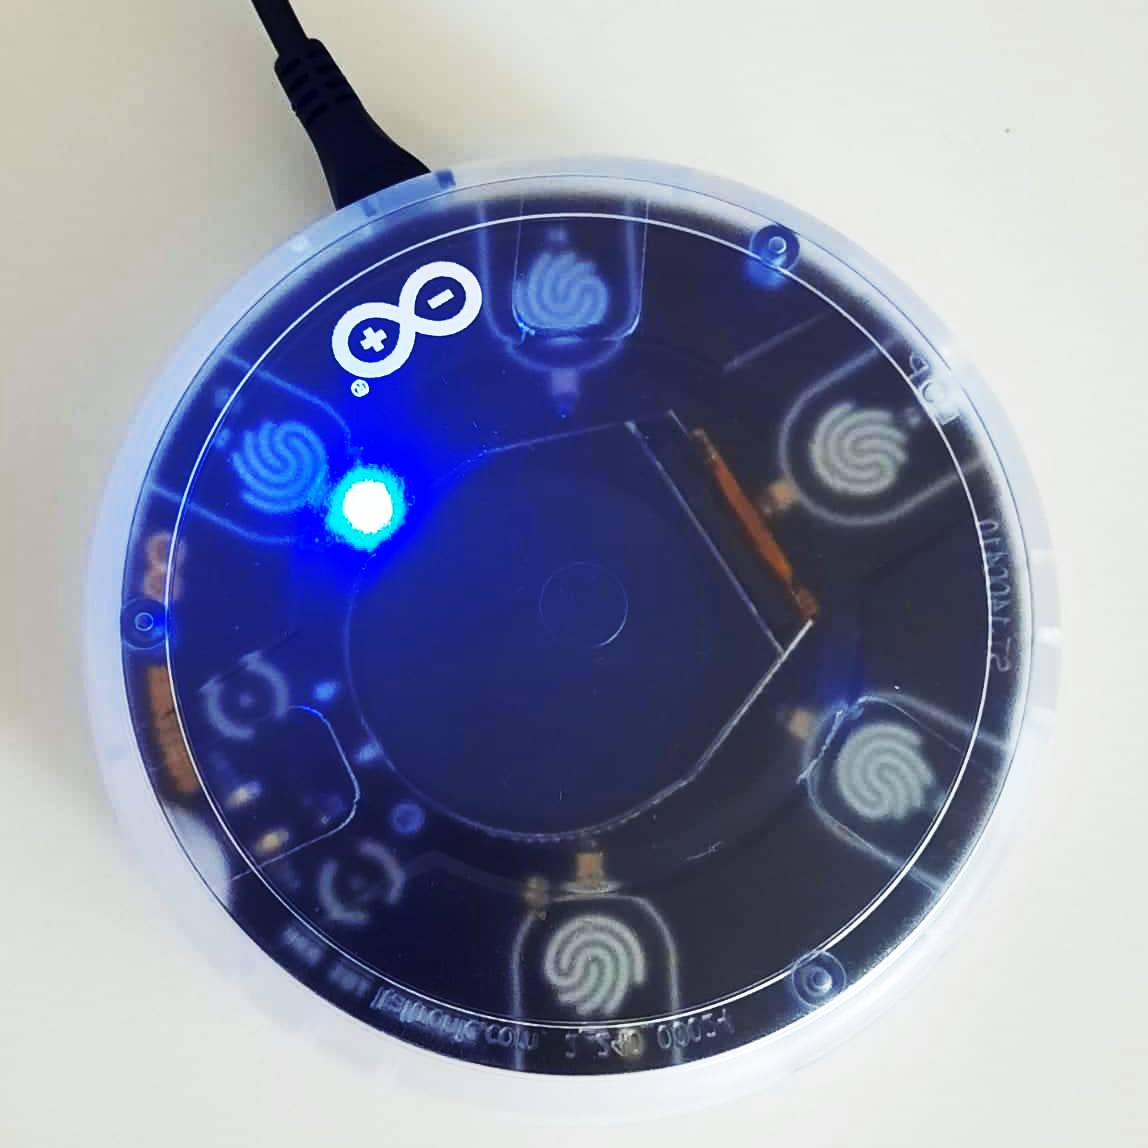 images/confluence/download/attachments/2324848596/arduino-remoteControl-blue-led.png